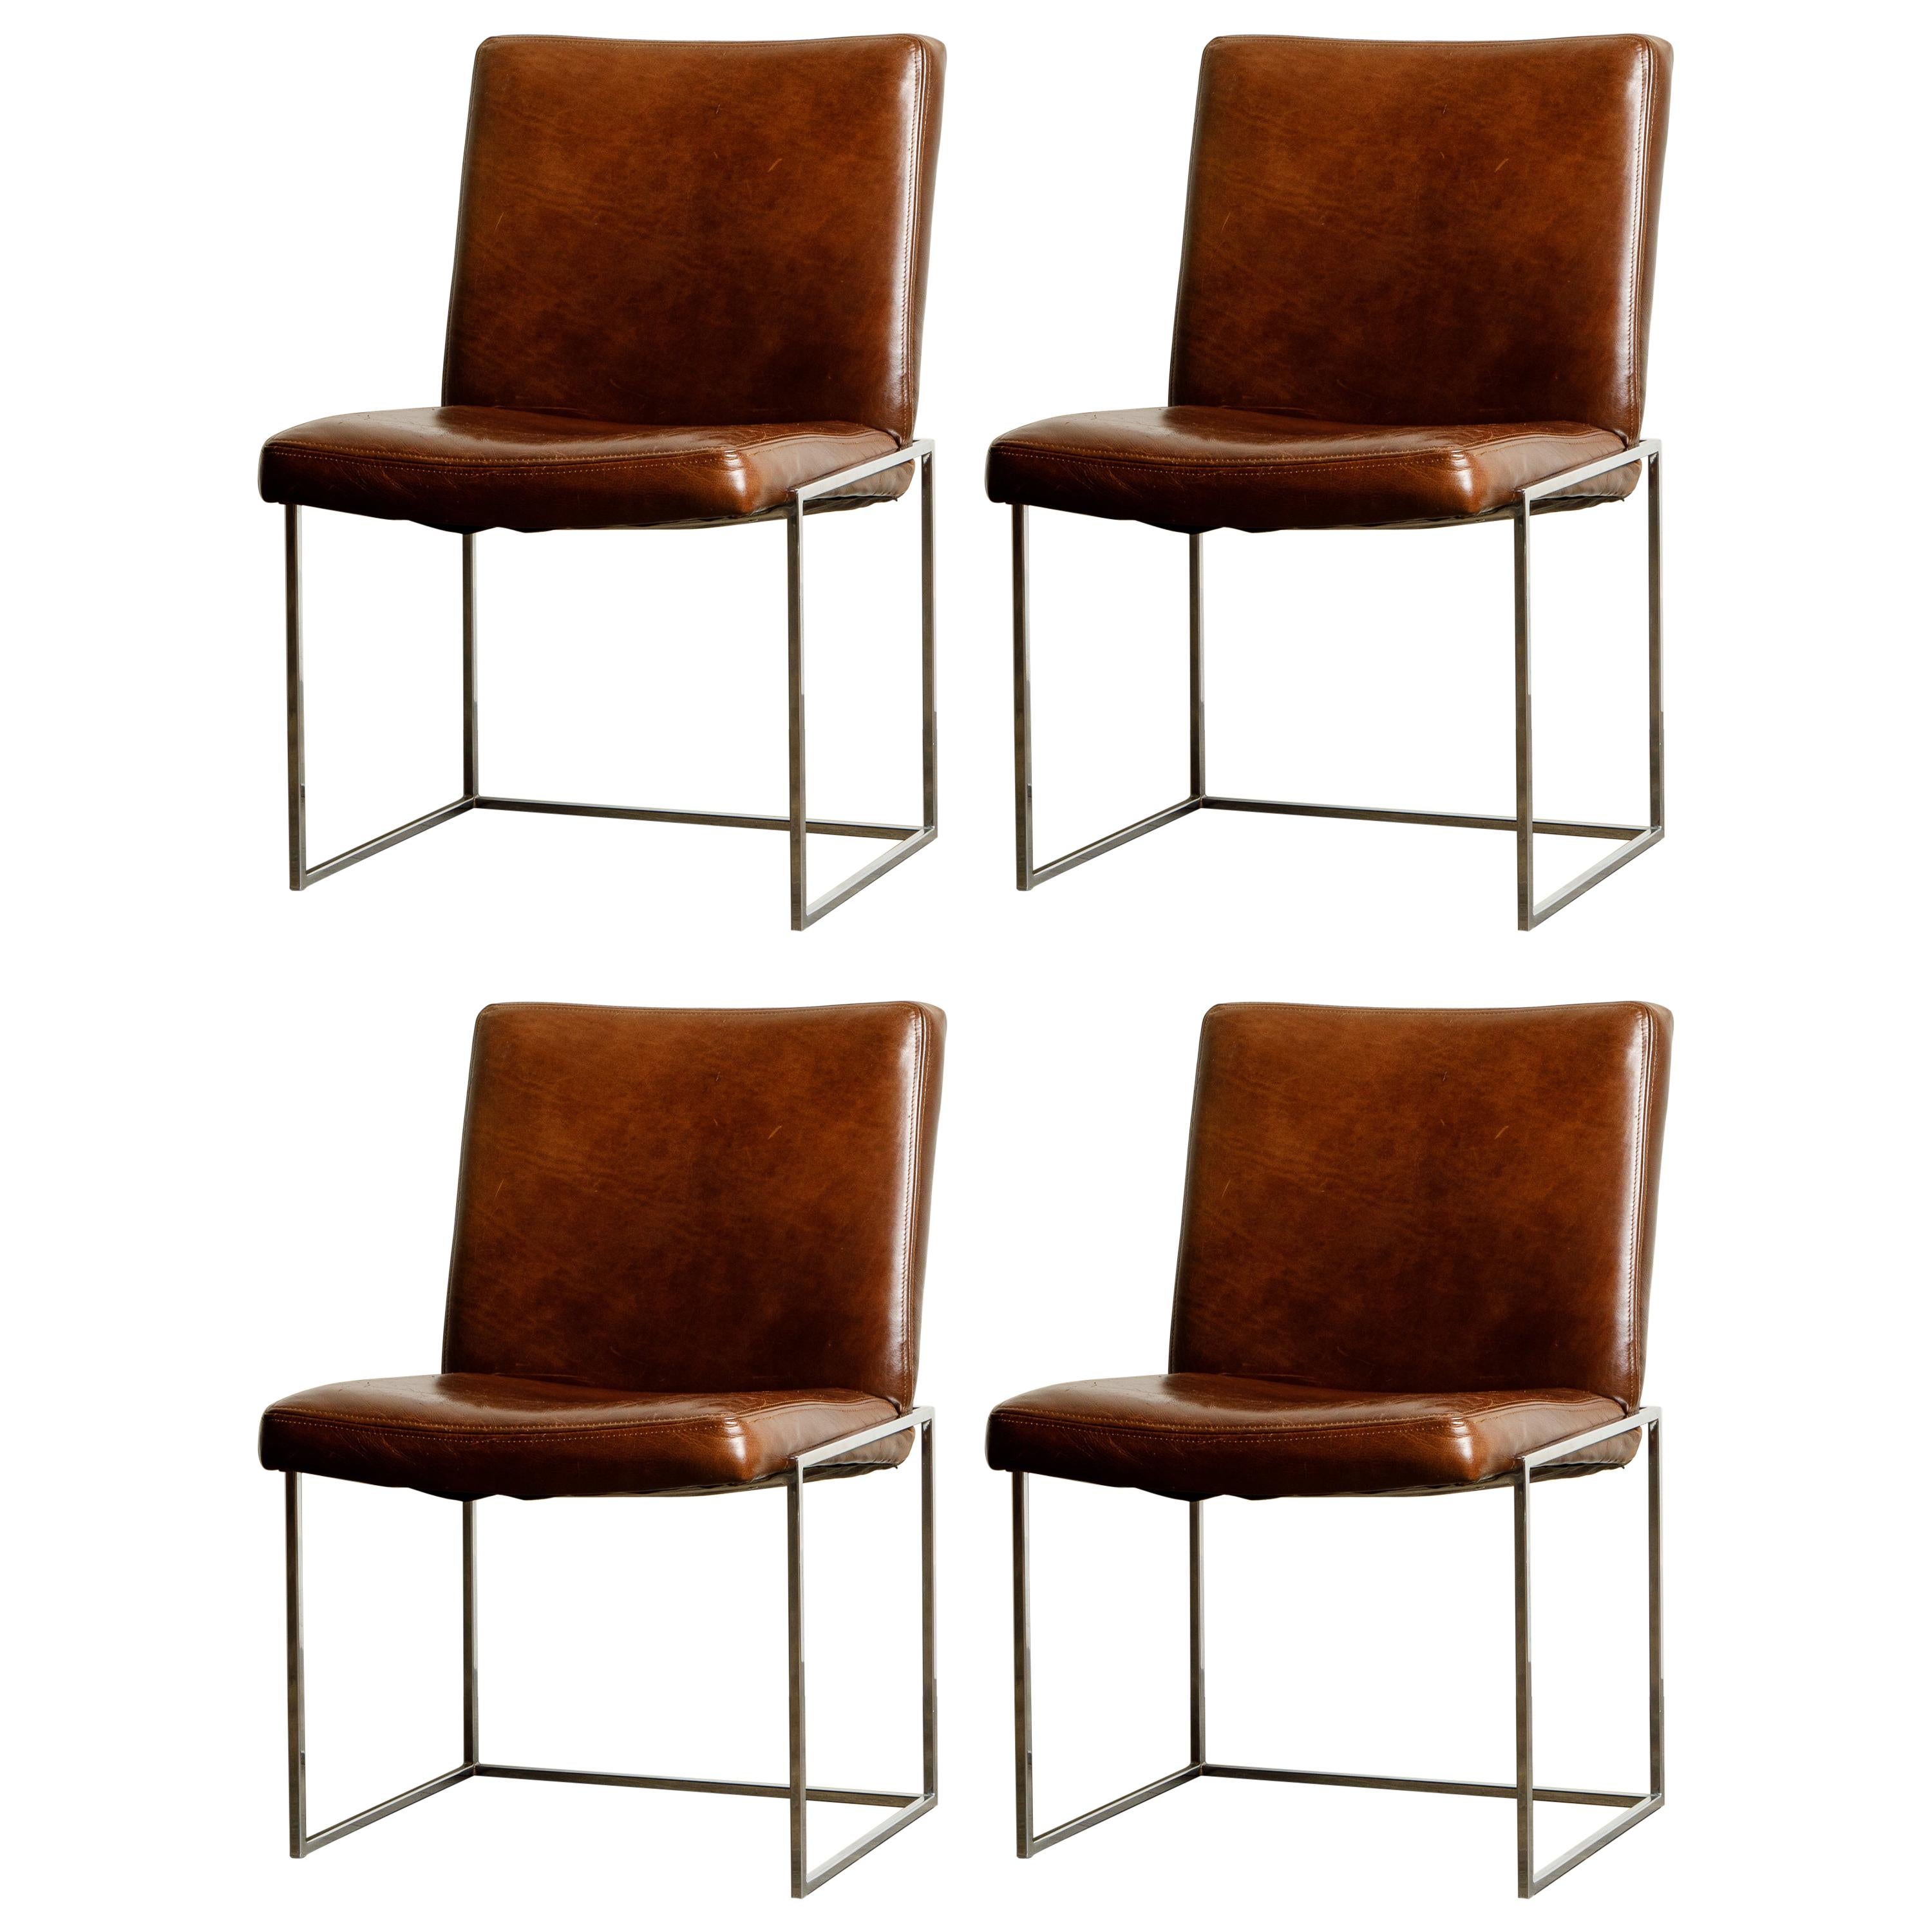 Set of Four Milo Baughman for Thayer Coggin Thinline Chrome Dining Chairs, 1970s